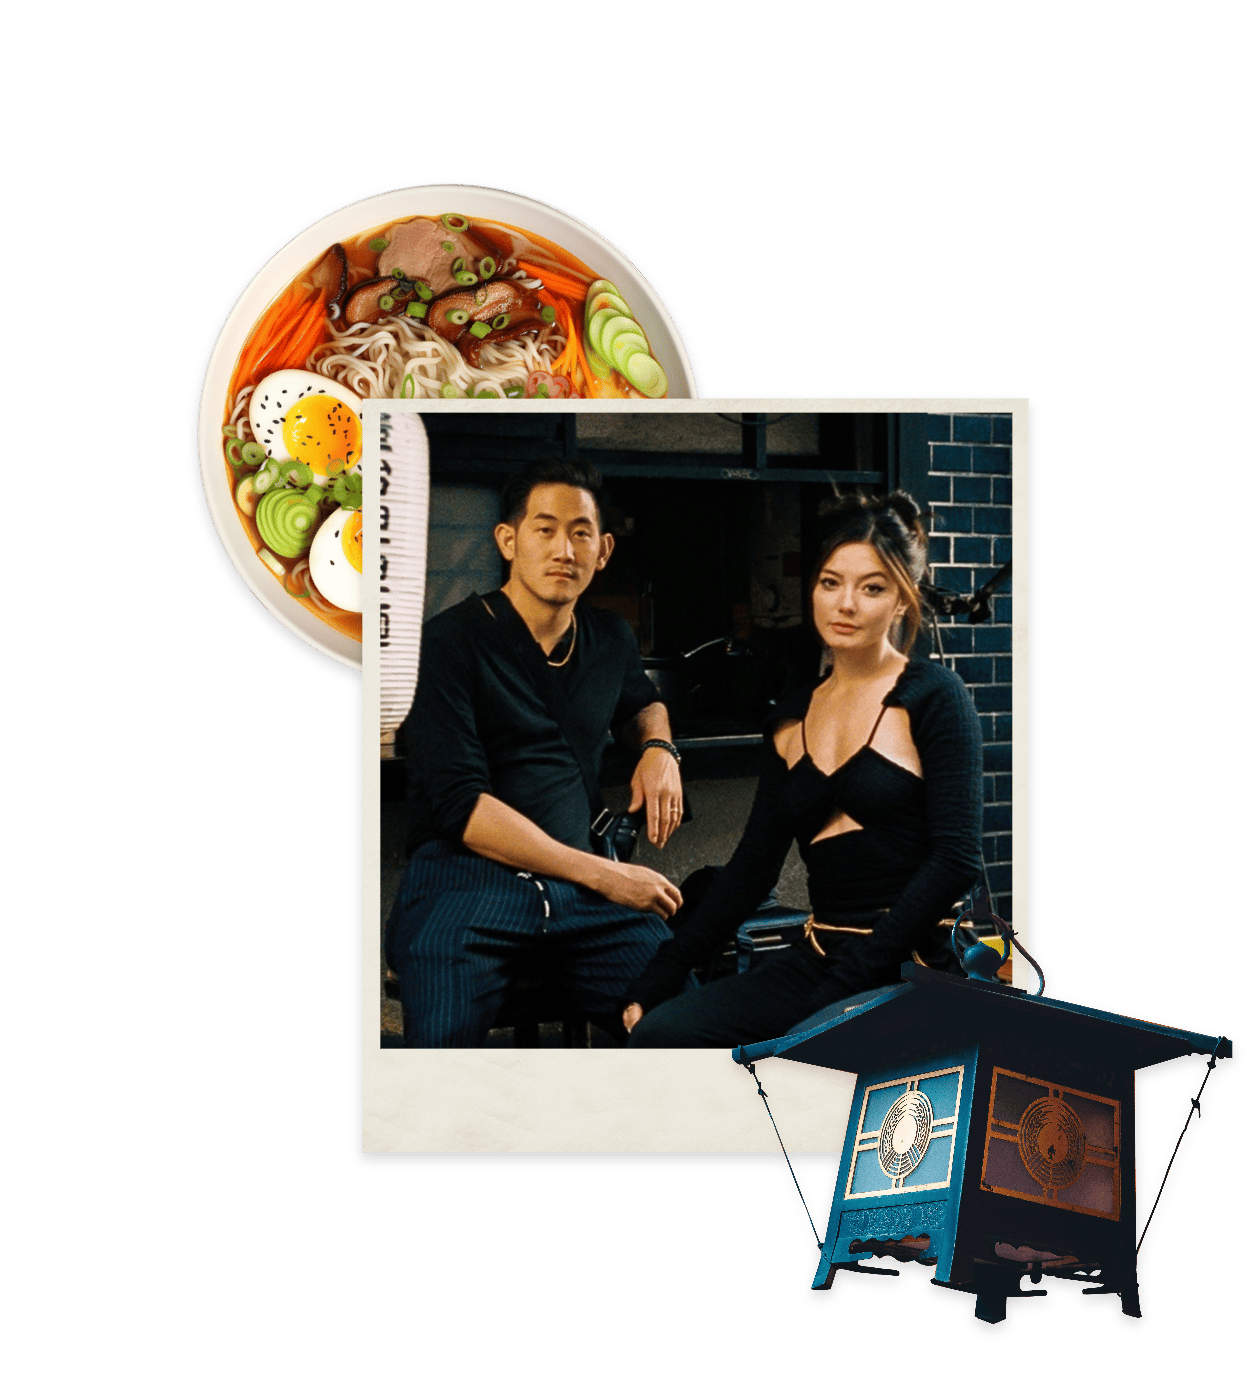 A collage with a noodle dish, beside a photo of an Asian man and woman dressed in black sitting at a table, overlaid on images of travel books.